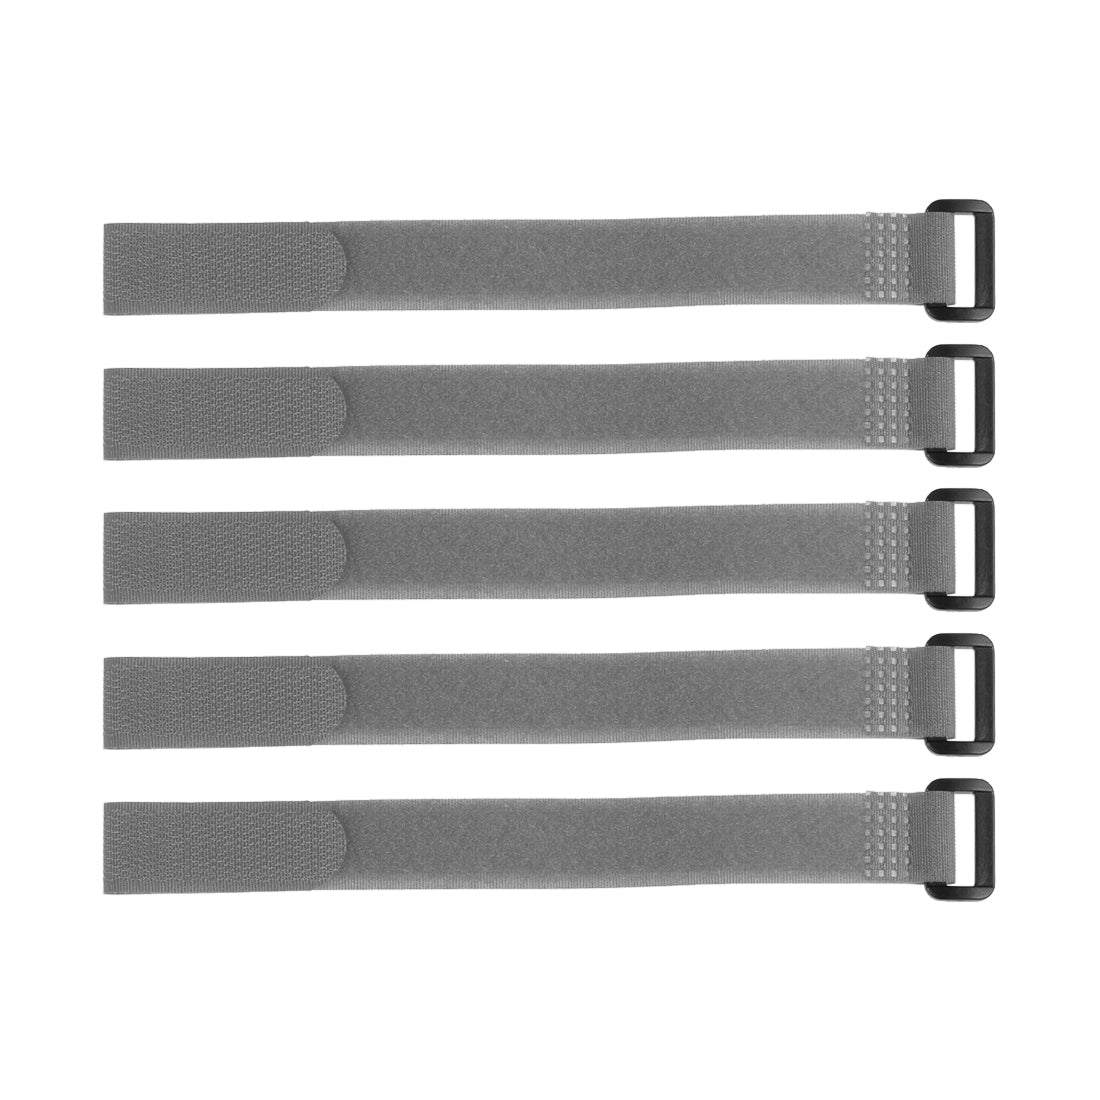 uxcell Uxcell 5pcs Hook and Loop Straps 3/4-inch x 16-inch Securing Straps Cable Tie (Gray)